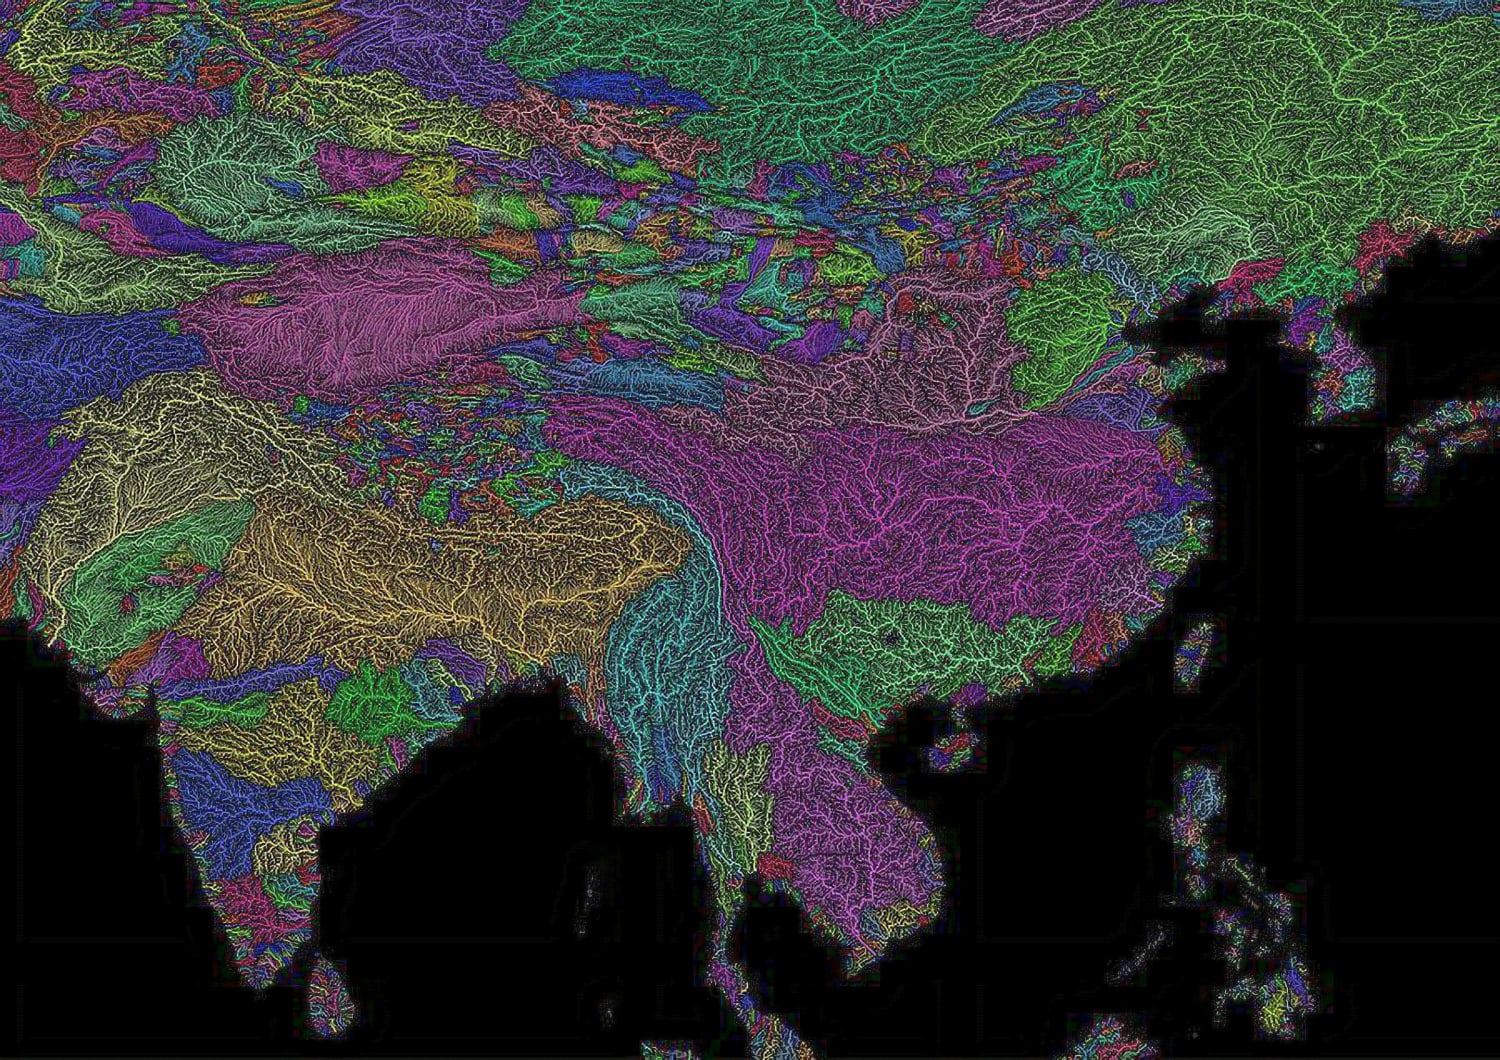 River basins of south & east Asia